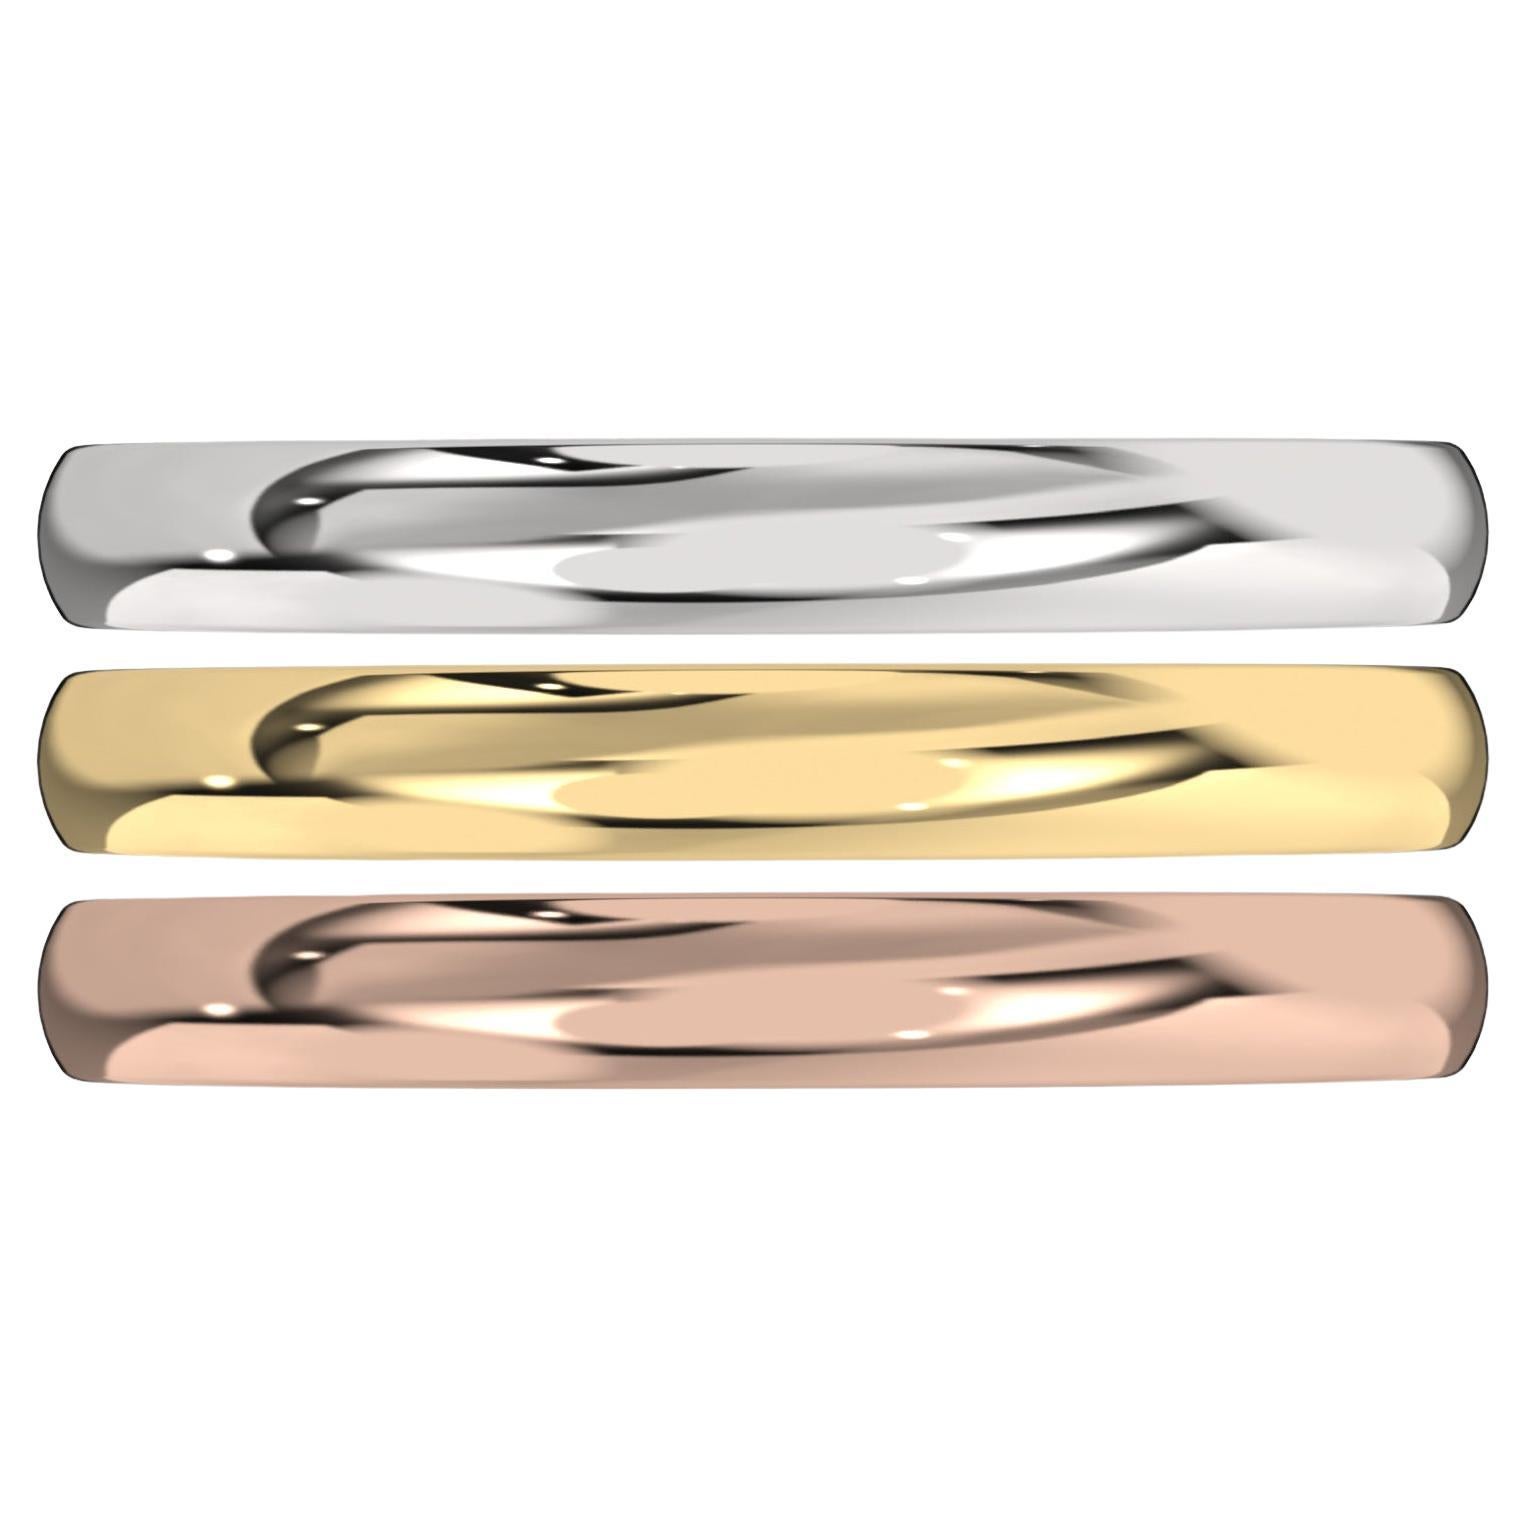 BY ORDER: Classic Band Ring in 18K White Gold, Yellow Gold, Rose Gold